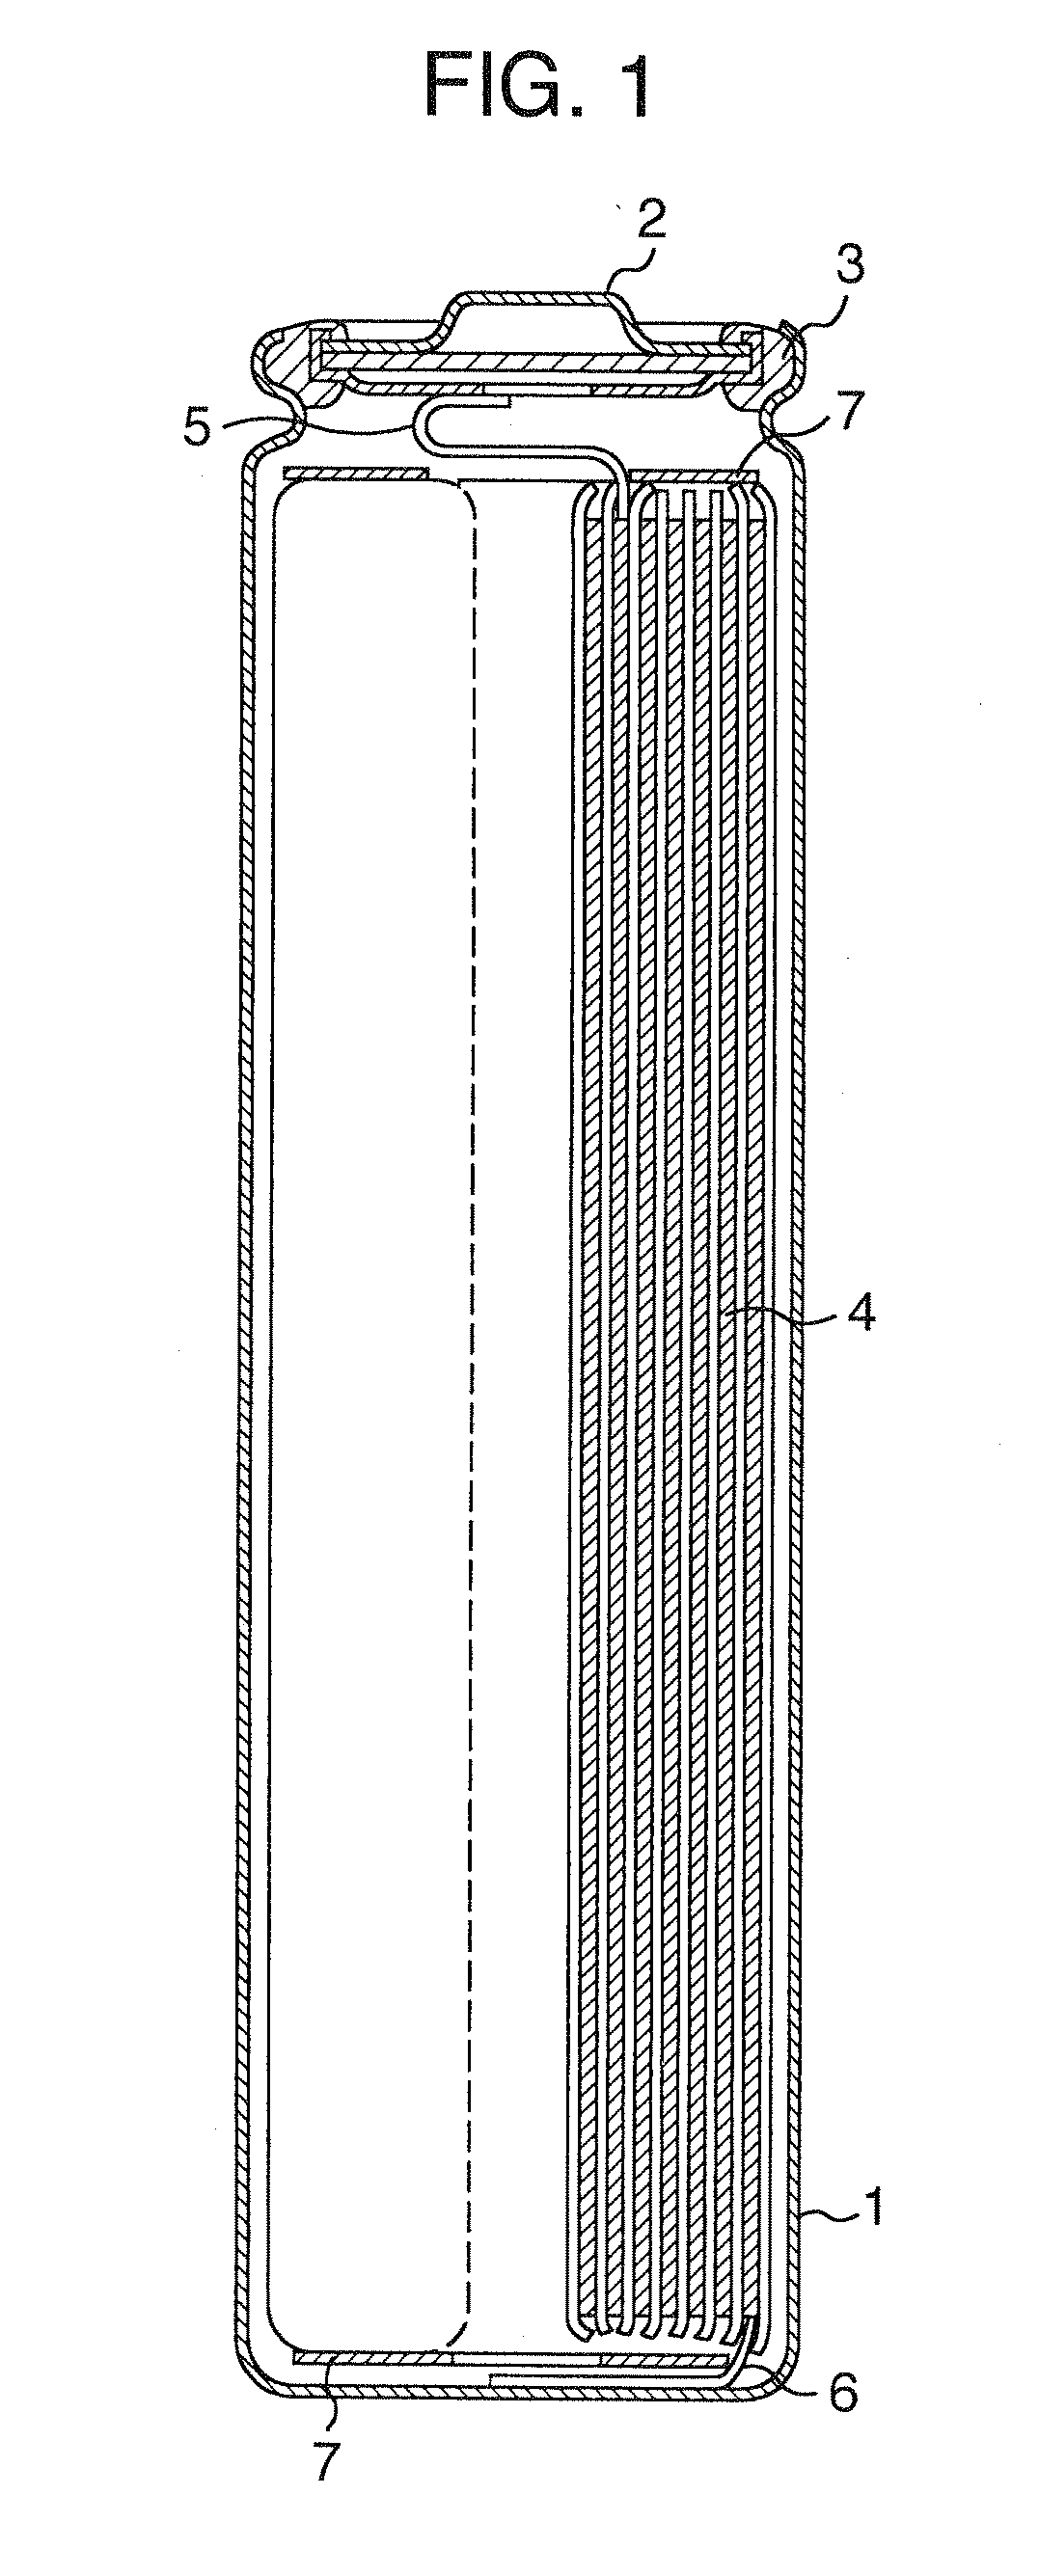 Non-aqueous electrolyte secondary batteries and devices using the same